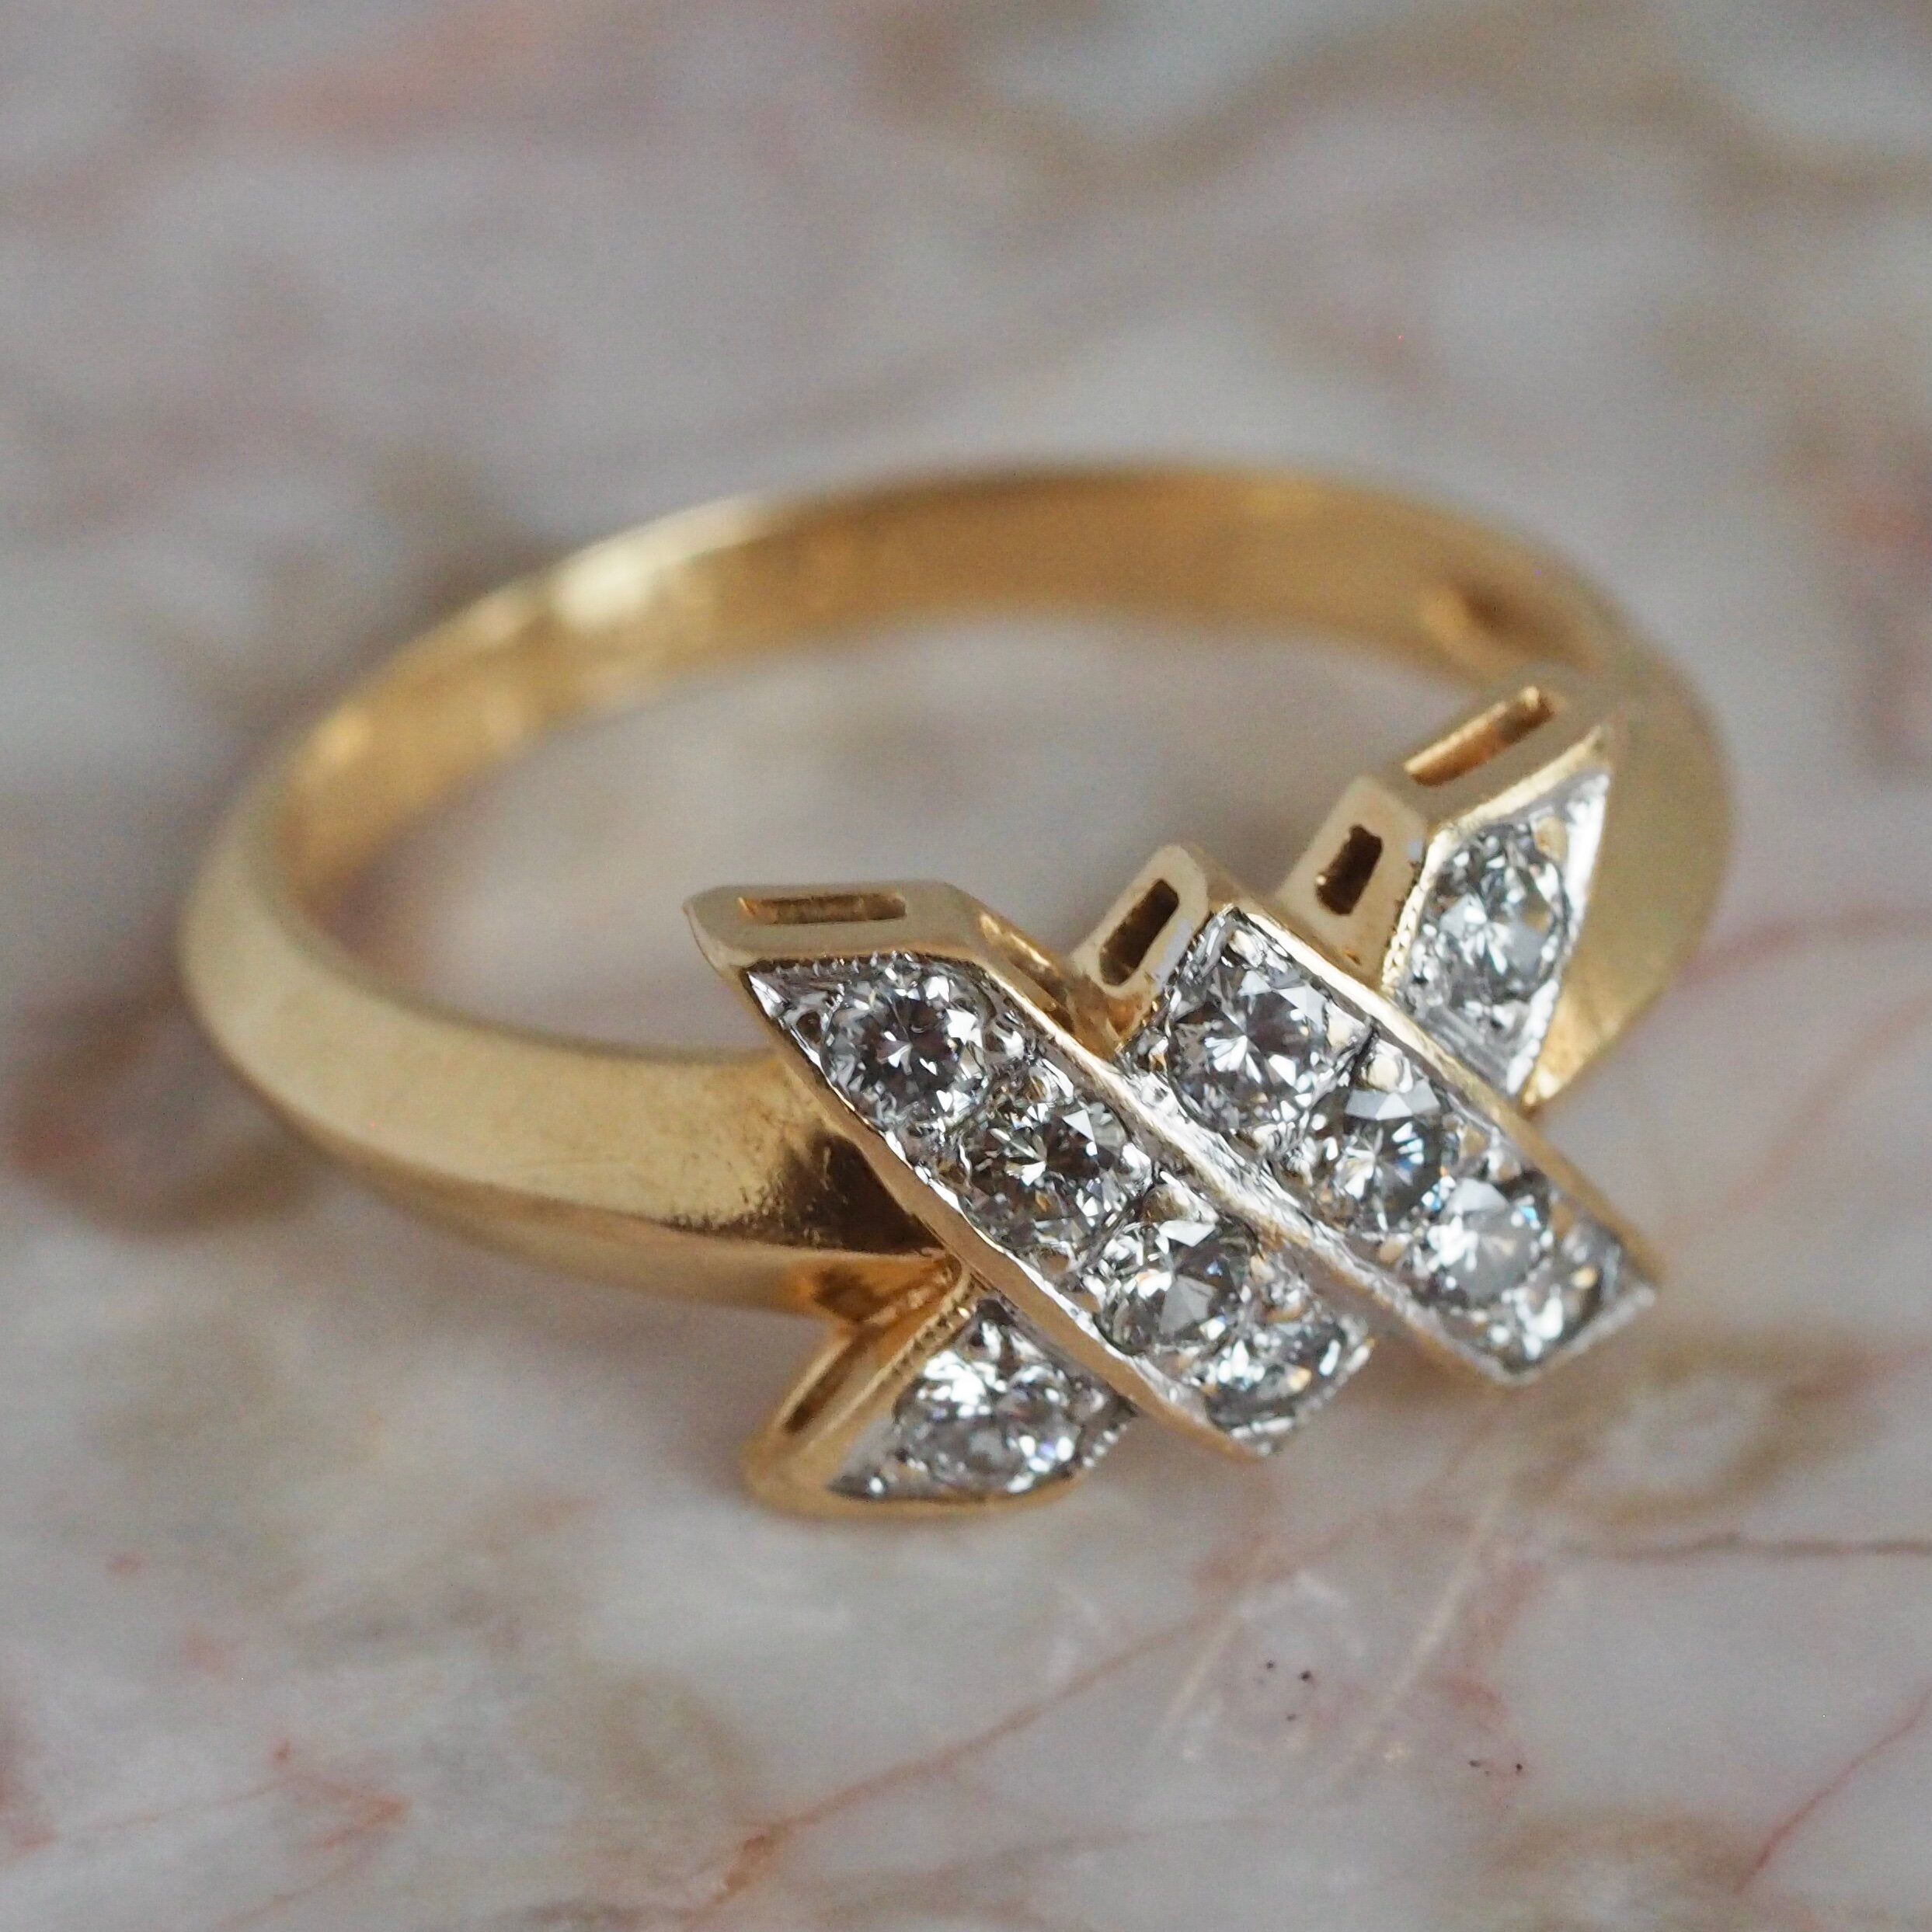 Vintage French 18k Gold Diamond Knot Ring